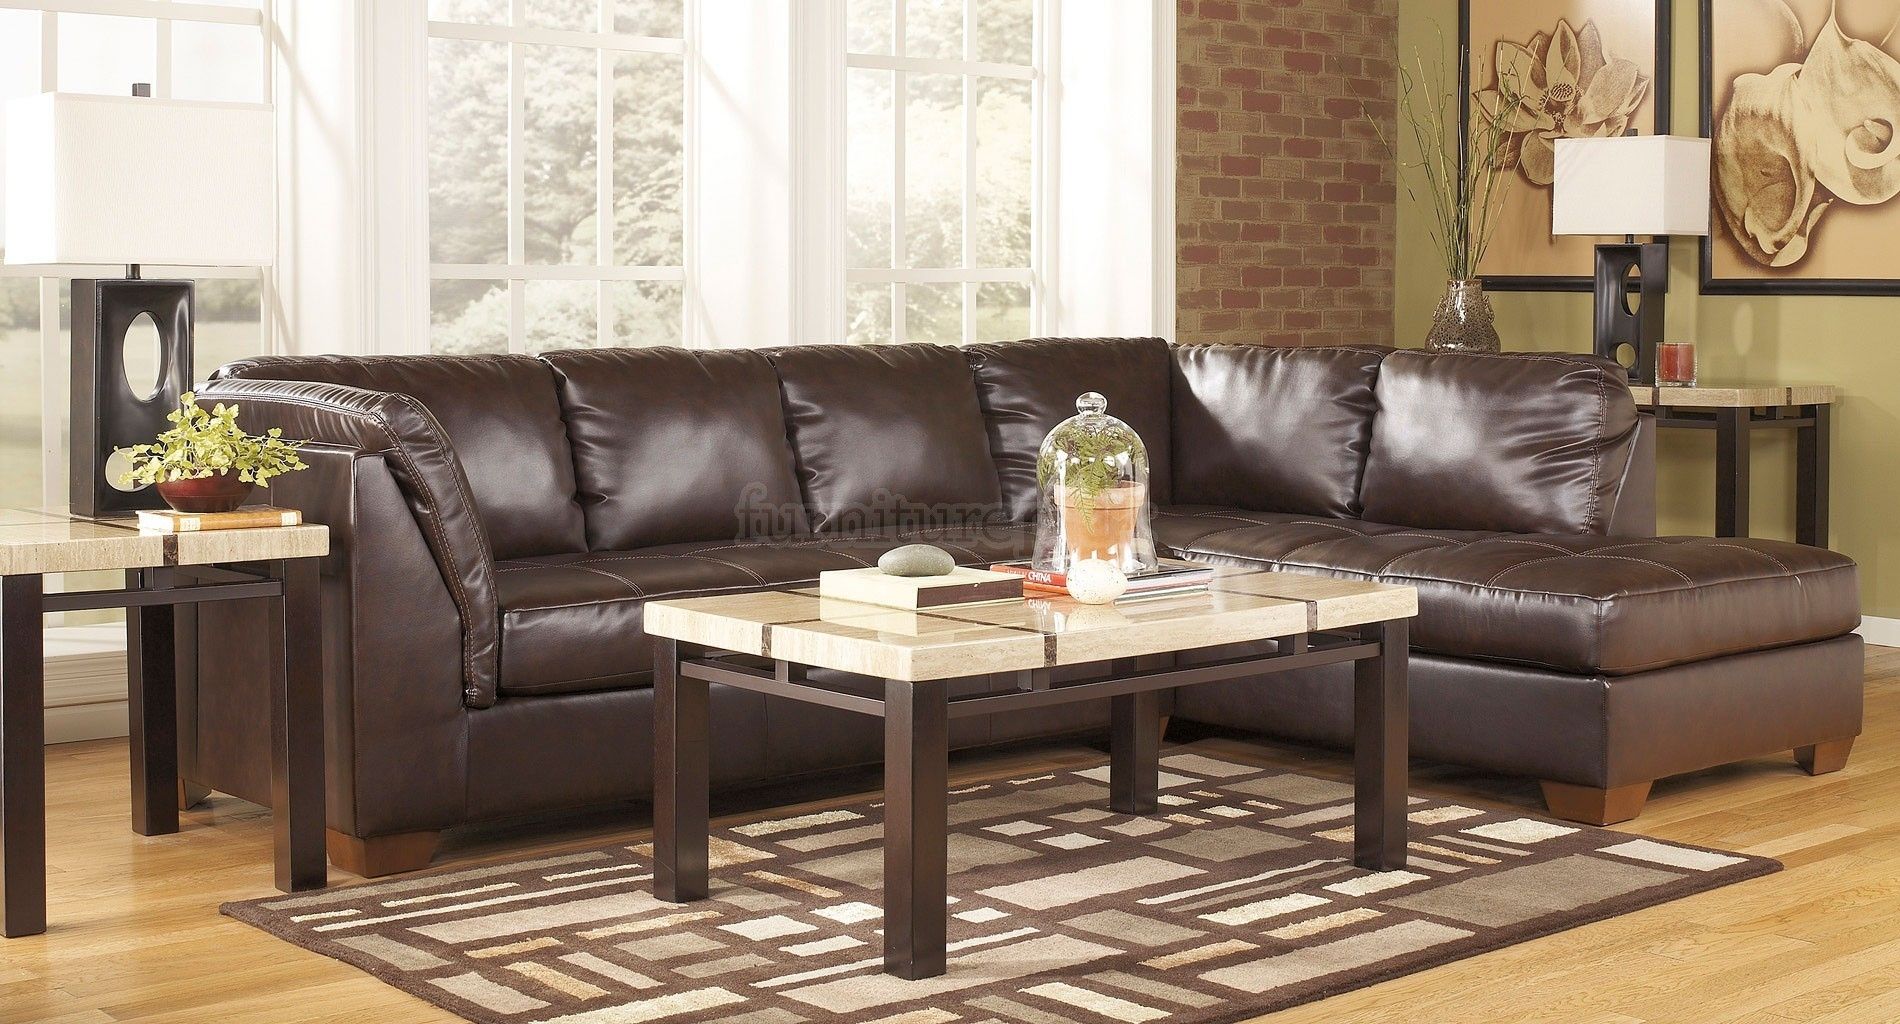 Furniture: Harbor Freight Furniture | Sectional Sofas Under 300 For Tallahassee Sectional Sofas (View 9 of 10)